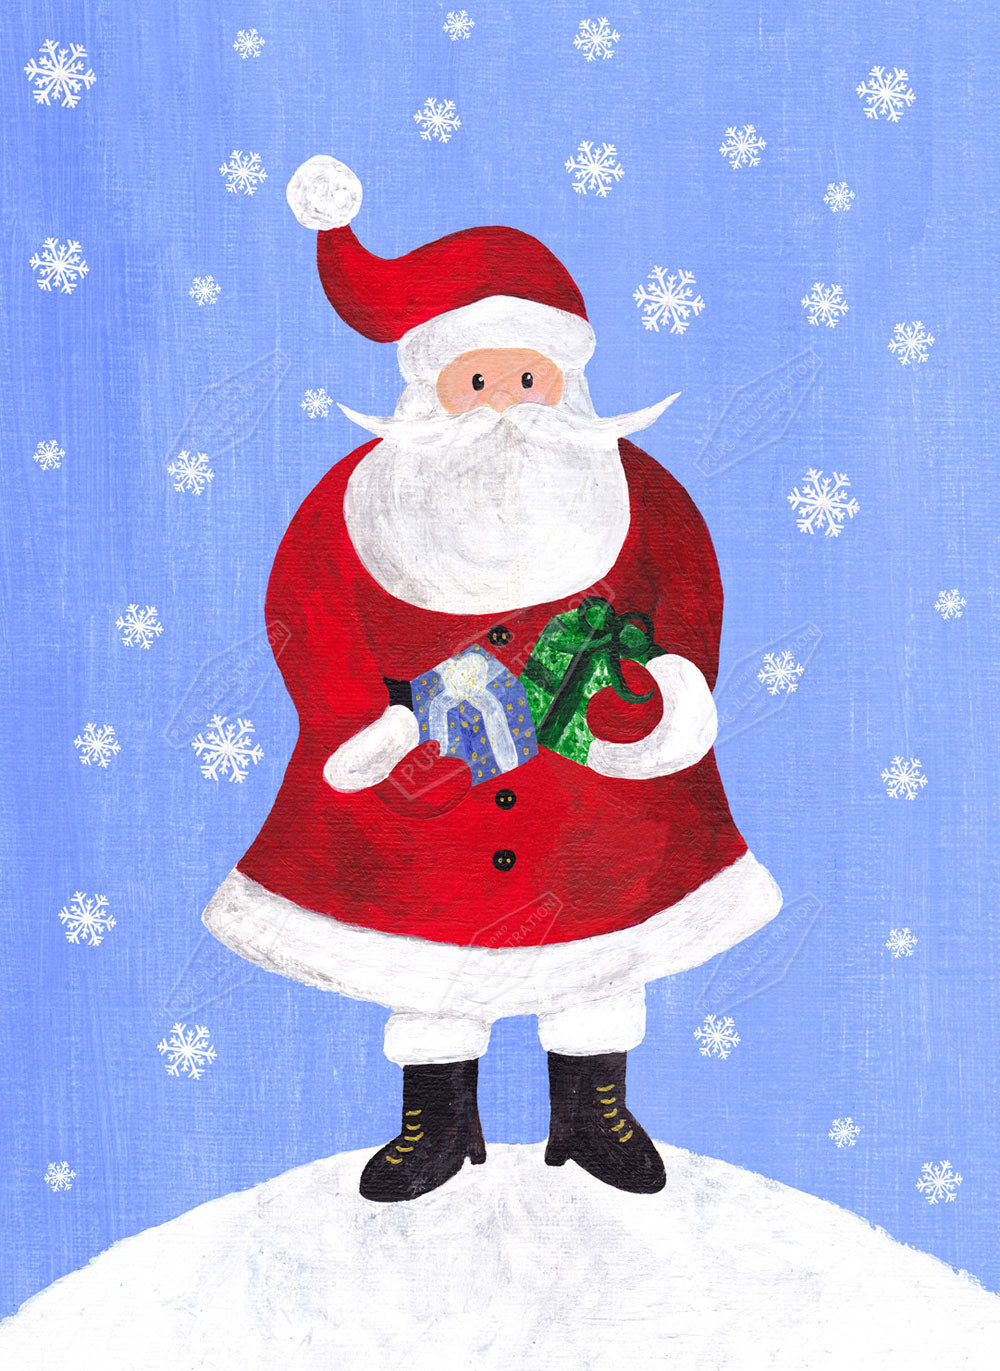 00019777SSN- Sian Summerhayes is represented by Pure Art Licensing Agency - Christmas Greeting Card Design